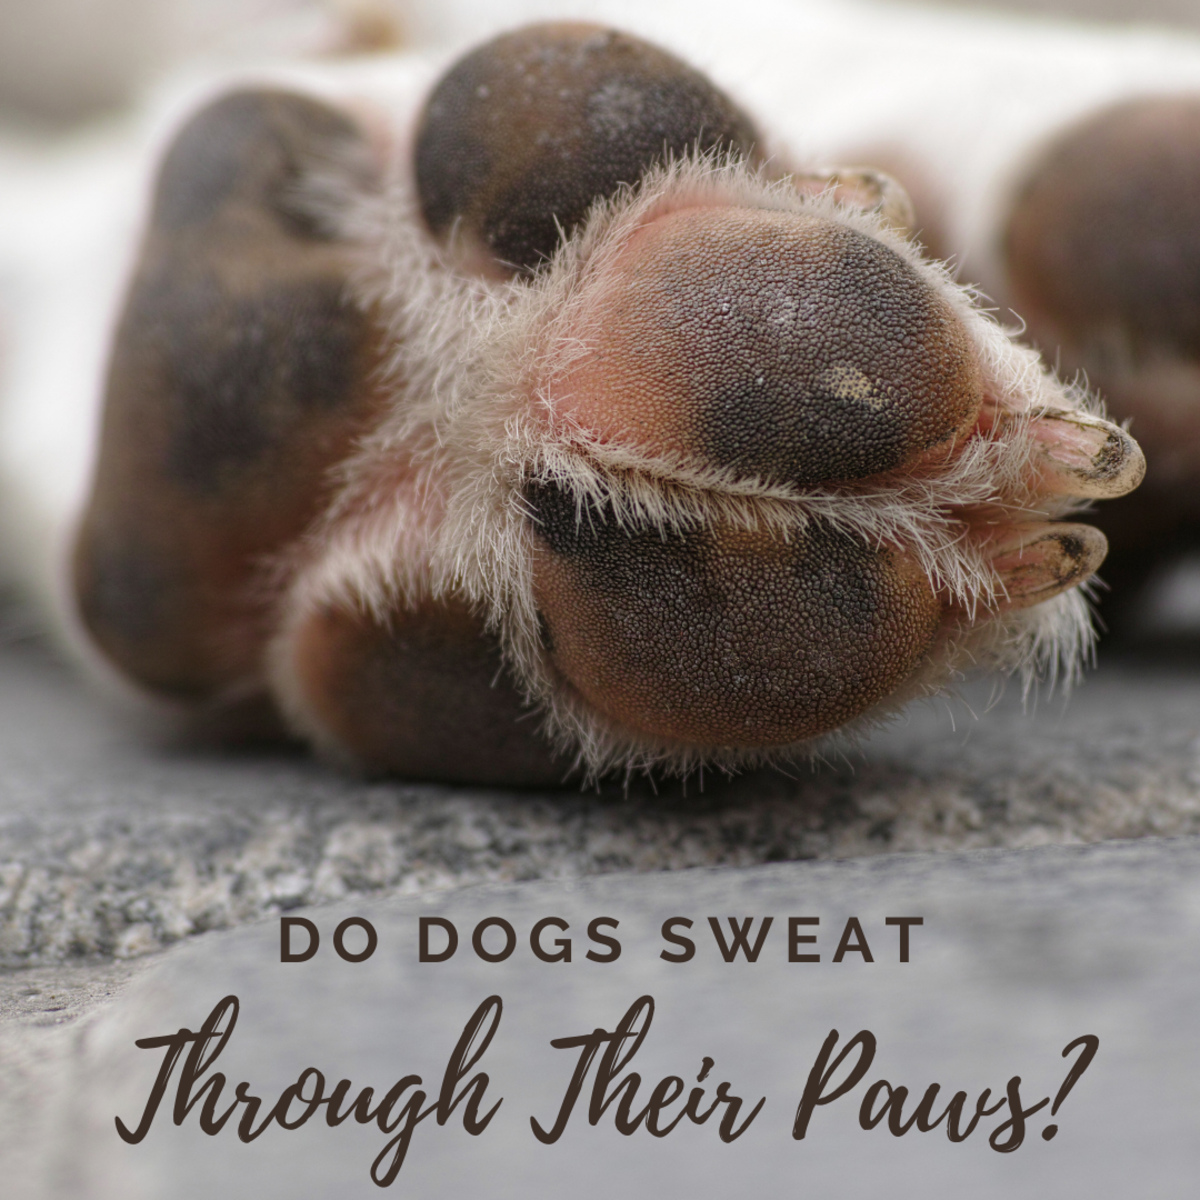 Do dogs have sweat glands?